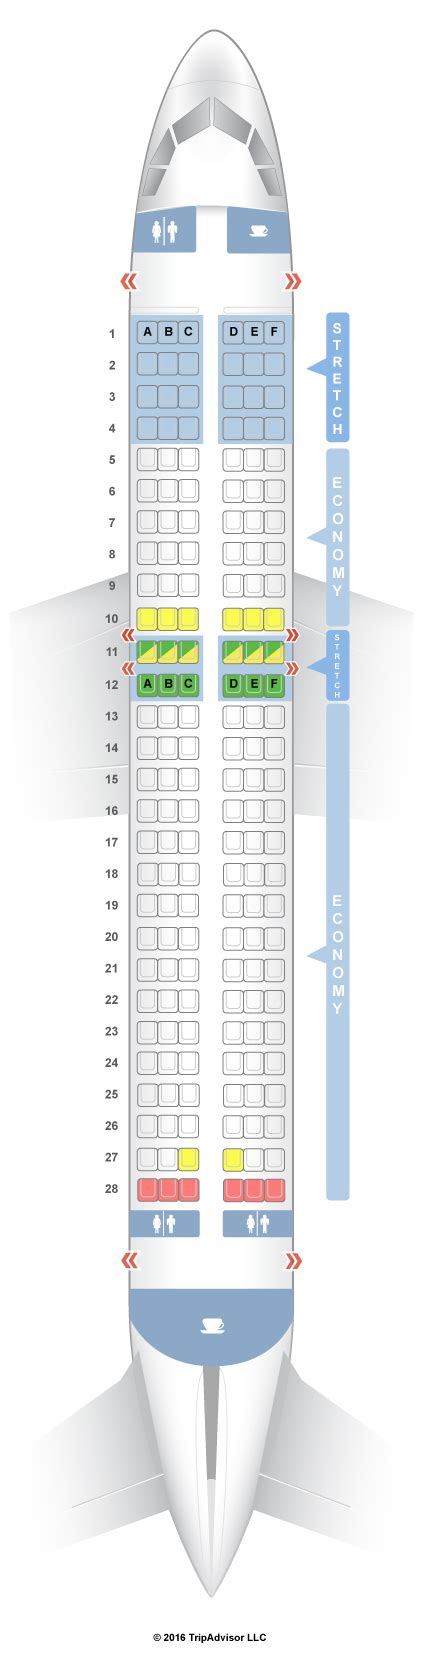 Delta Airlines Seating Chart Airbus A320